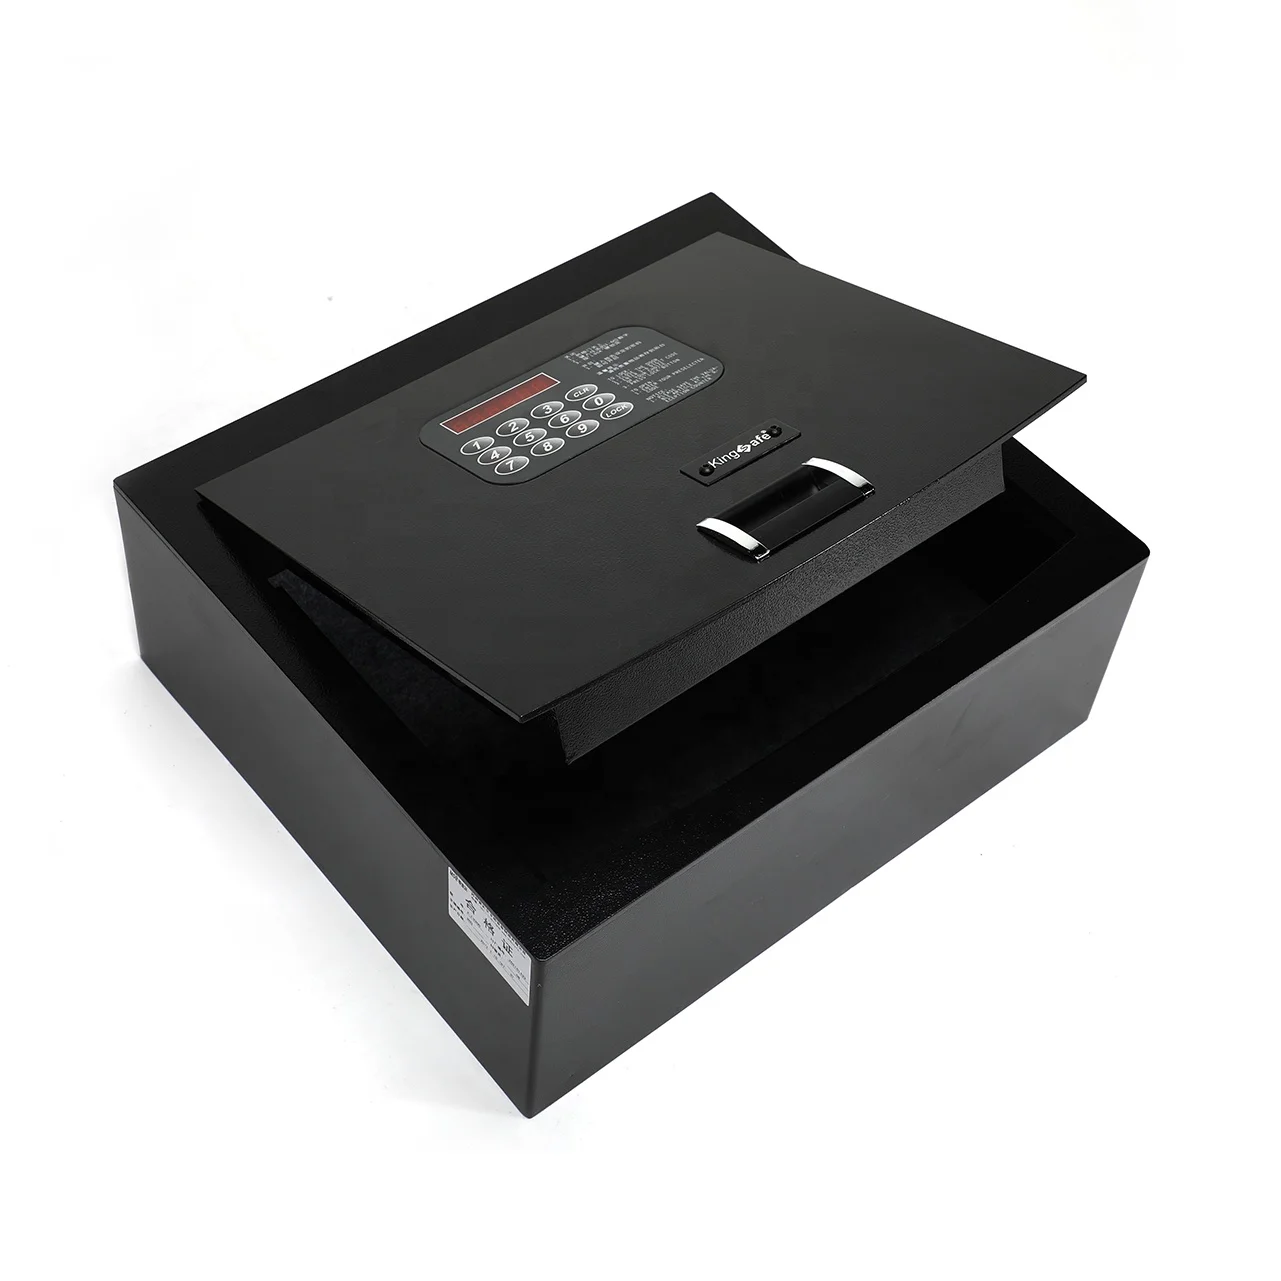 Electronic 15 inch laptop size safe digital hotel room safe box with master passwords (1600427835815)